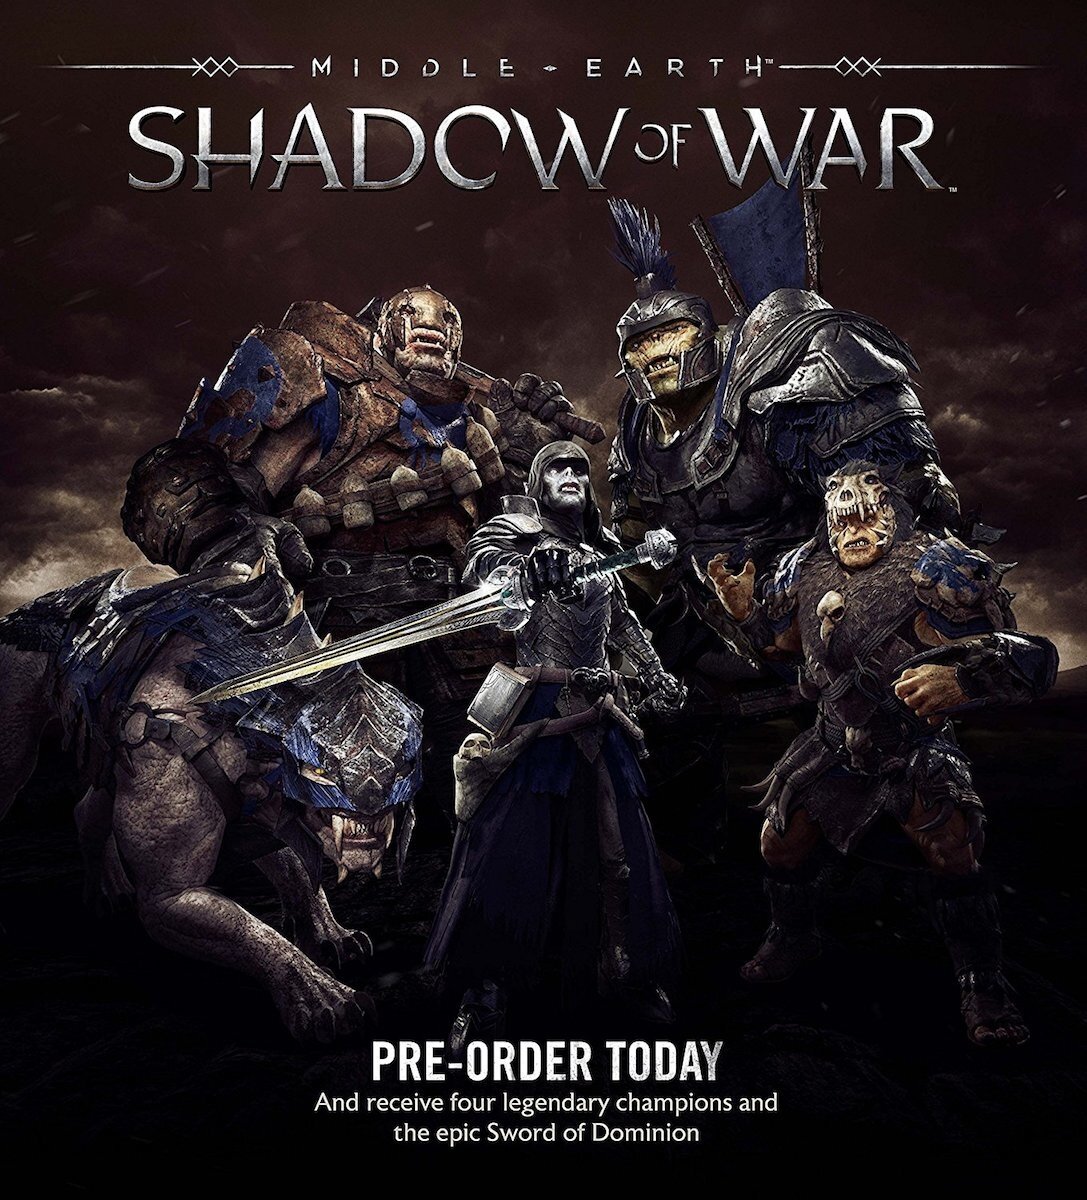 Middle-Earth: Shadow of War Playstation 4 PS4 NEW